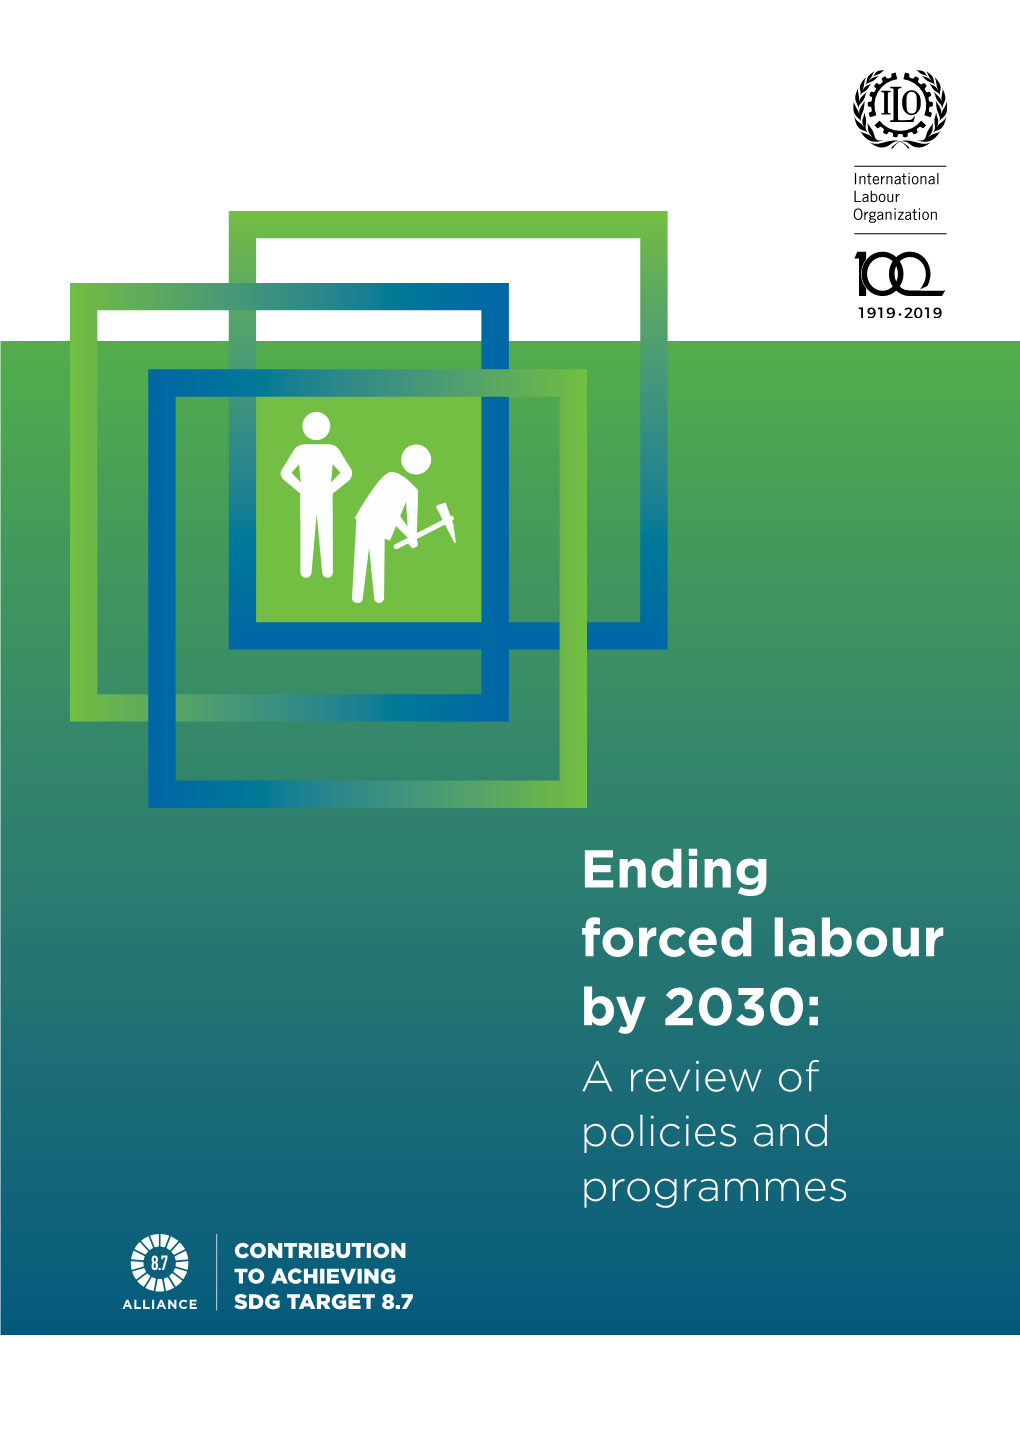 Ending Forced Labour by 2030: a Review of Policies and Programmes